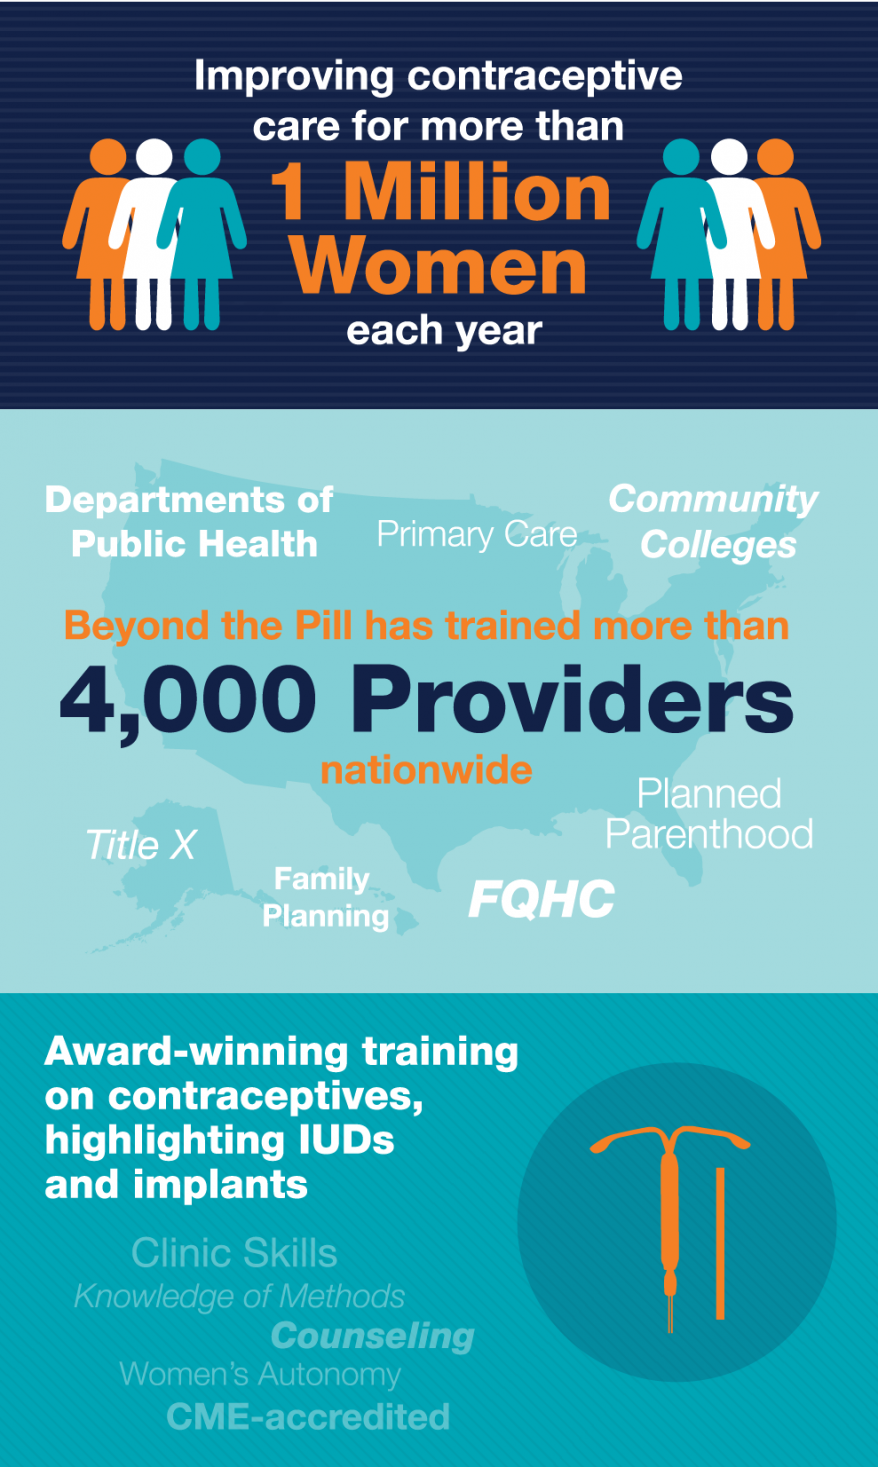 Improving contraceptive care for more than 1 million women each year. Beyond the Pill has trained more than 4,000 providers nationwide. Award-winning training on contraceptives, highlighting IUDs and implants. 